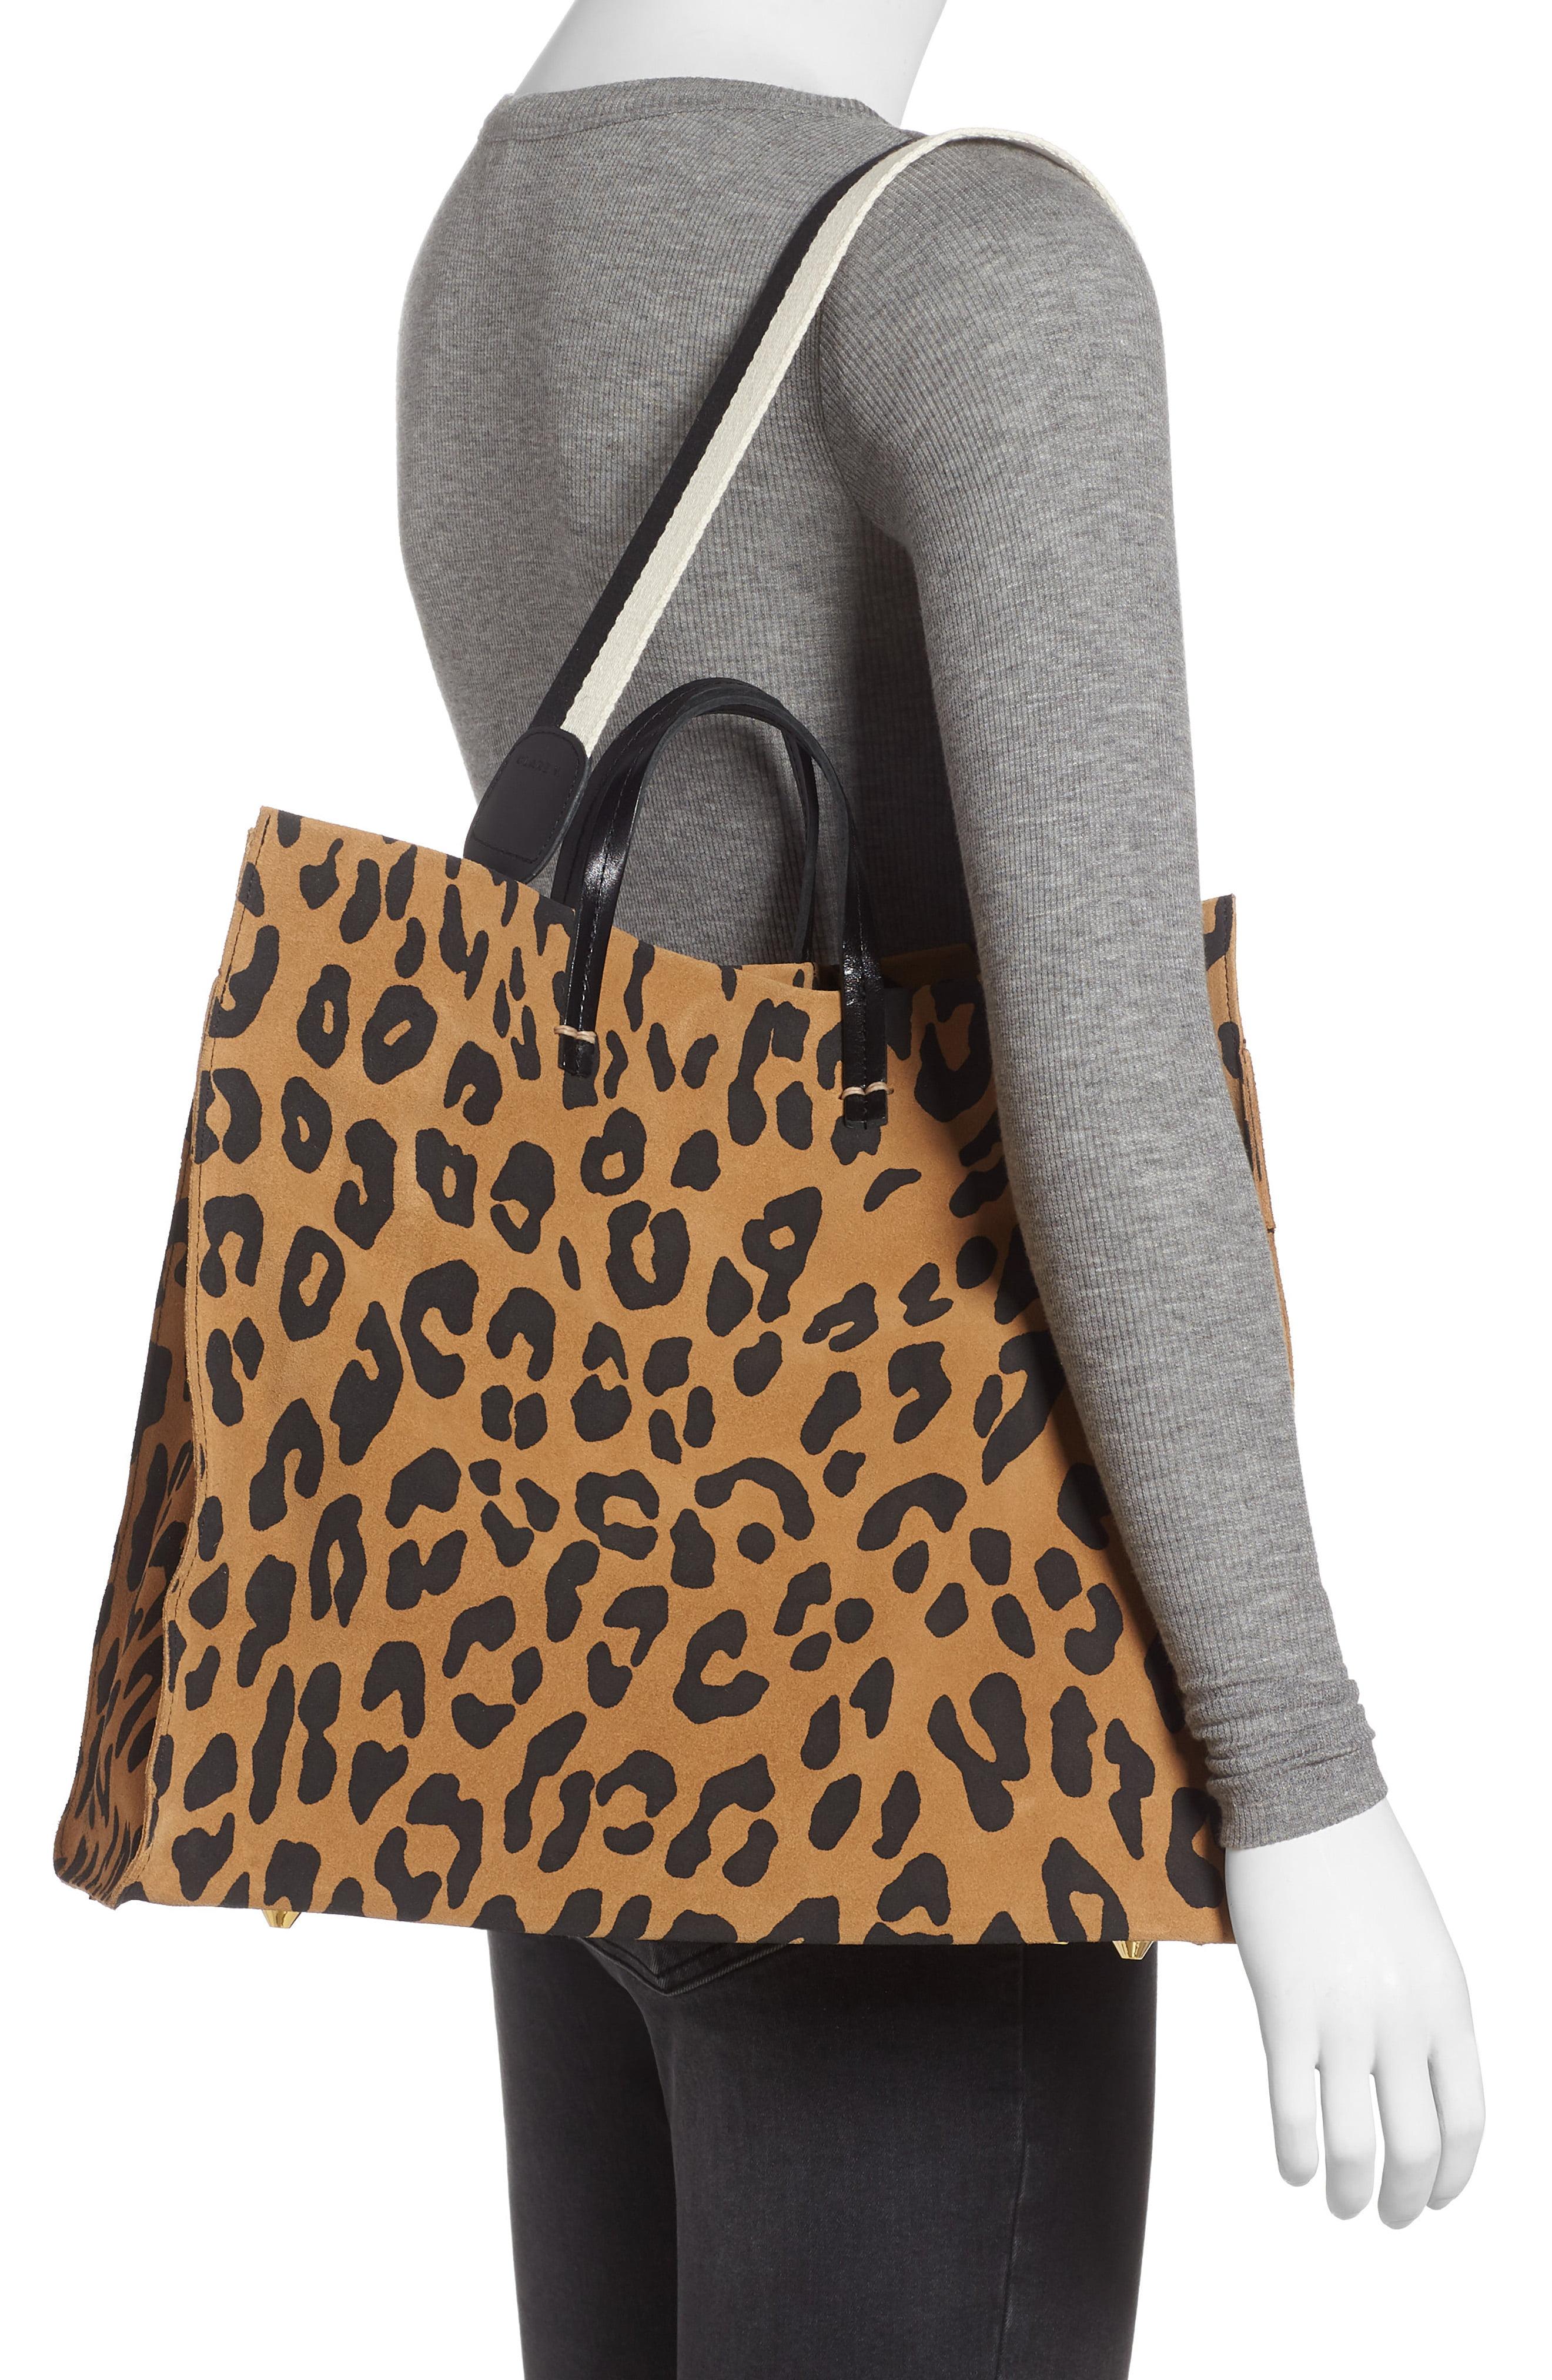 Petit Simple Tote in Leopard Hair by Clare V.